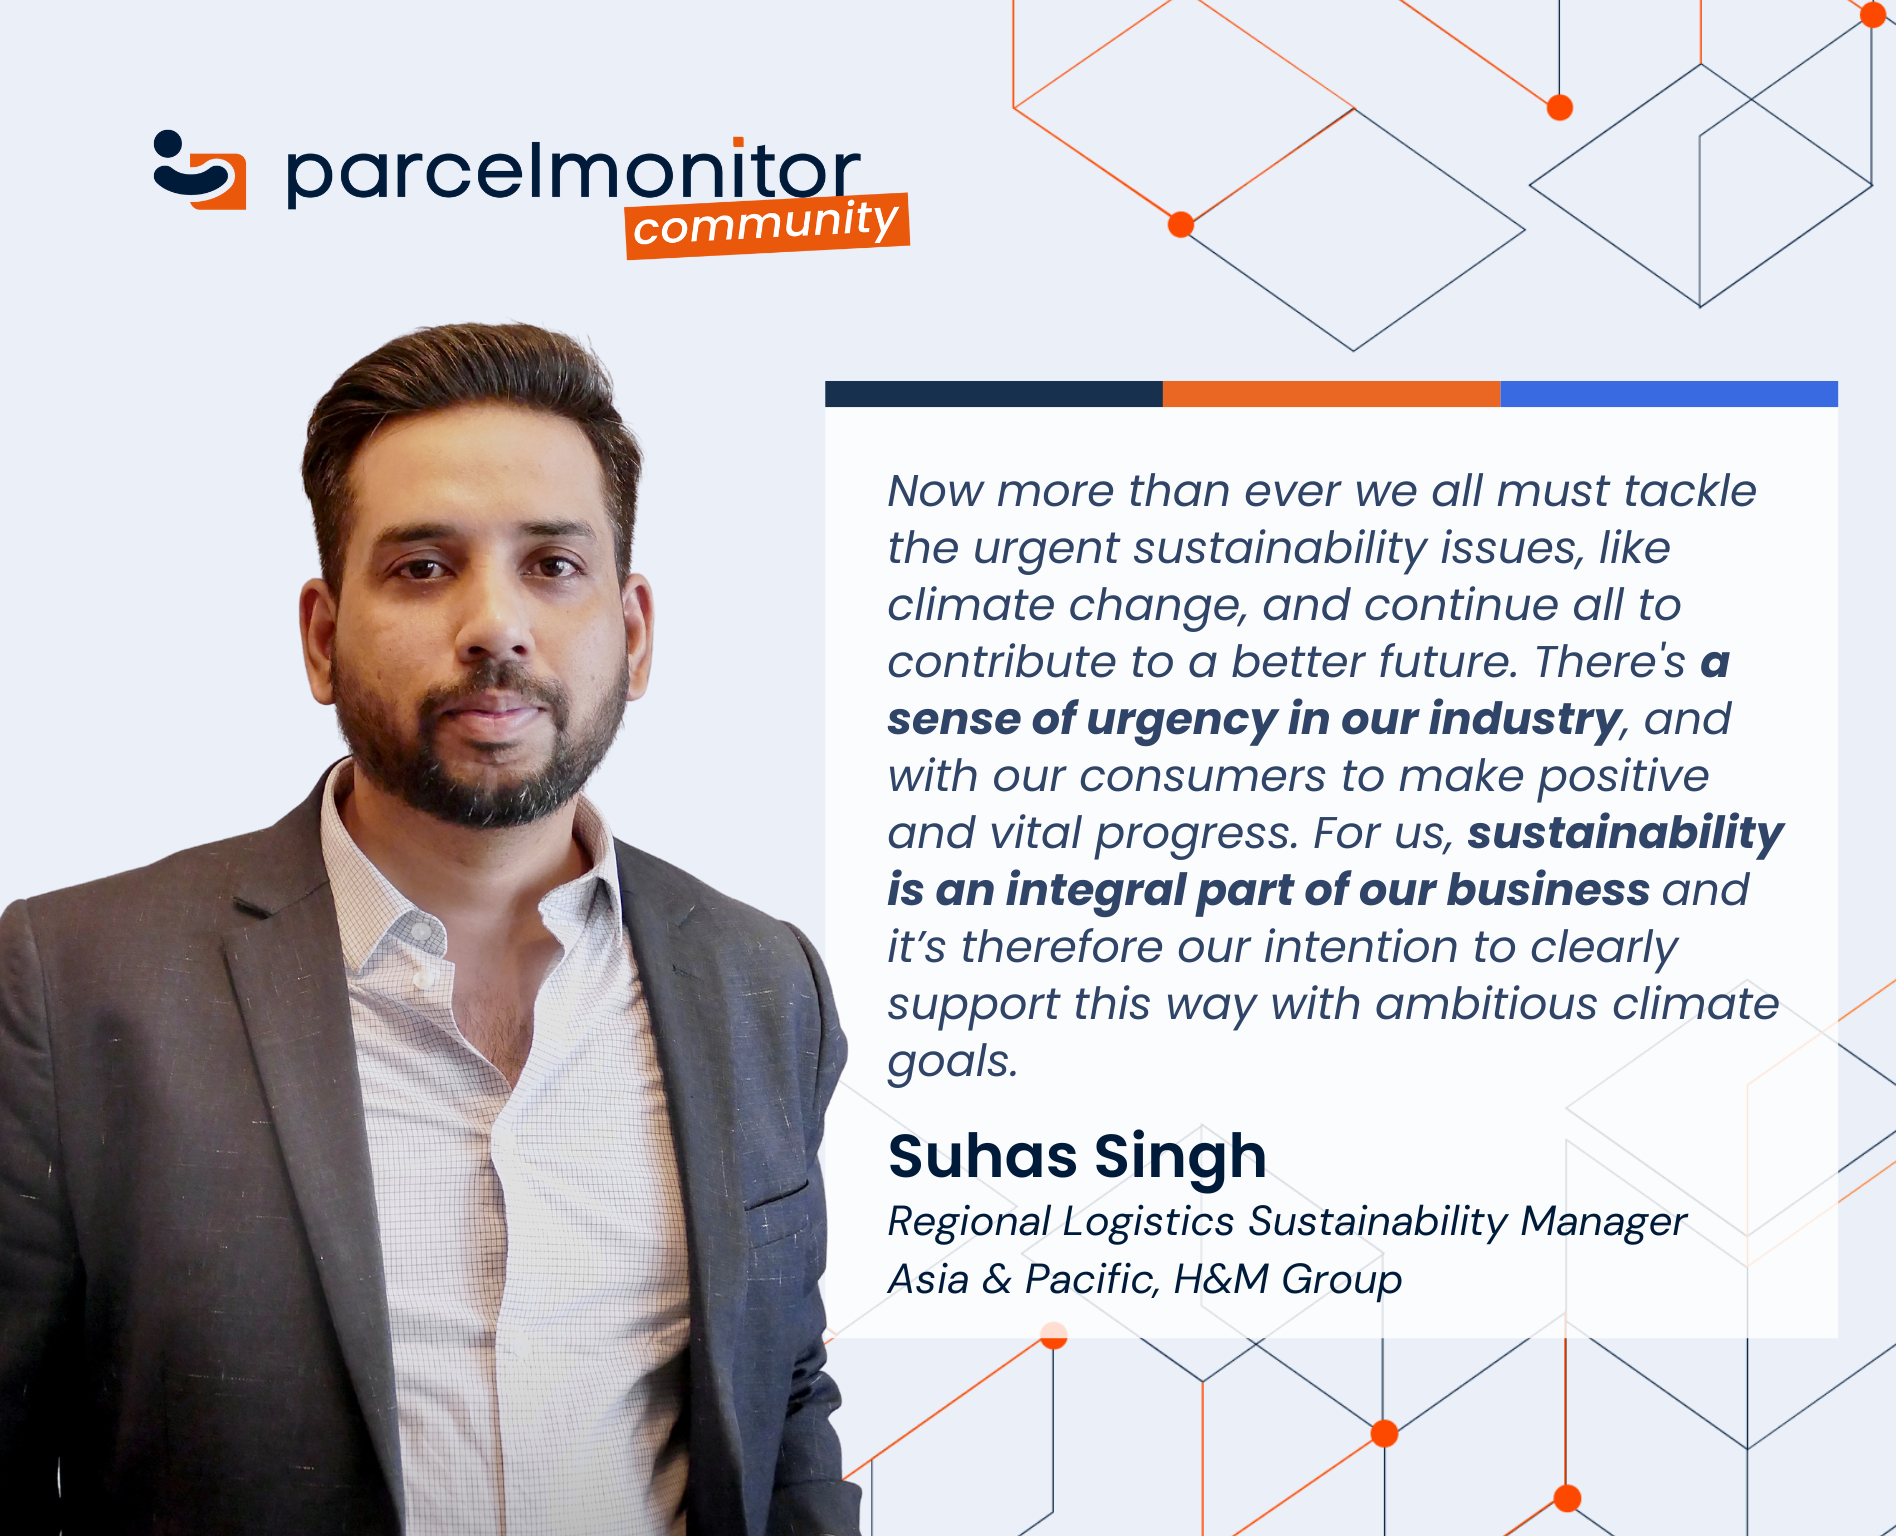 Earth Day 2023 article #1: Suhas Singh, Regional Logistics Sustainability Manager Asia & Pacific, H&M Group